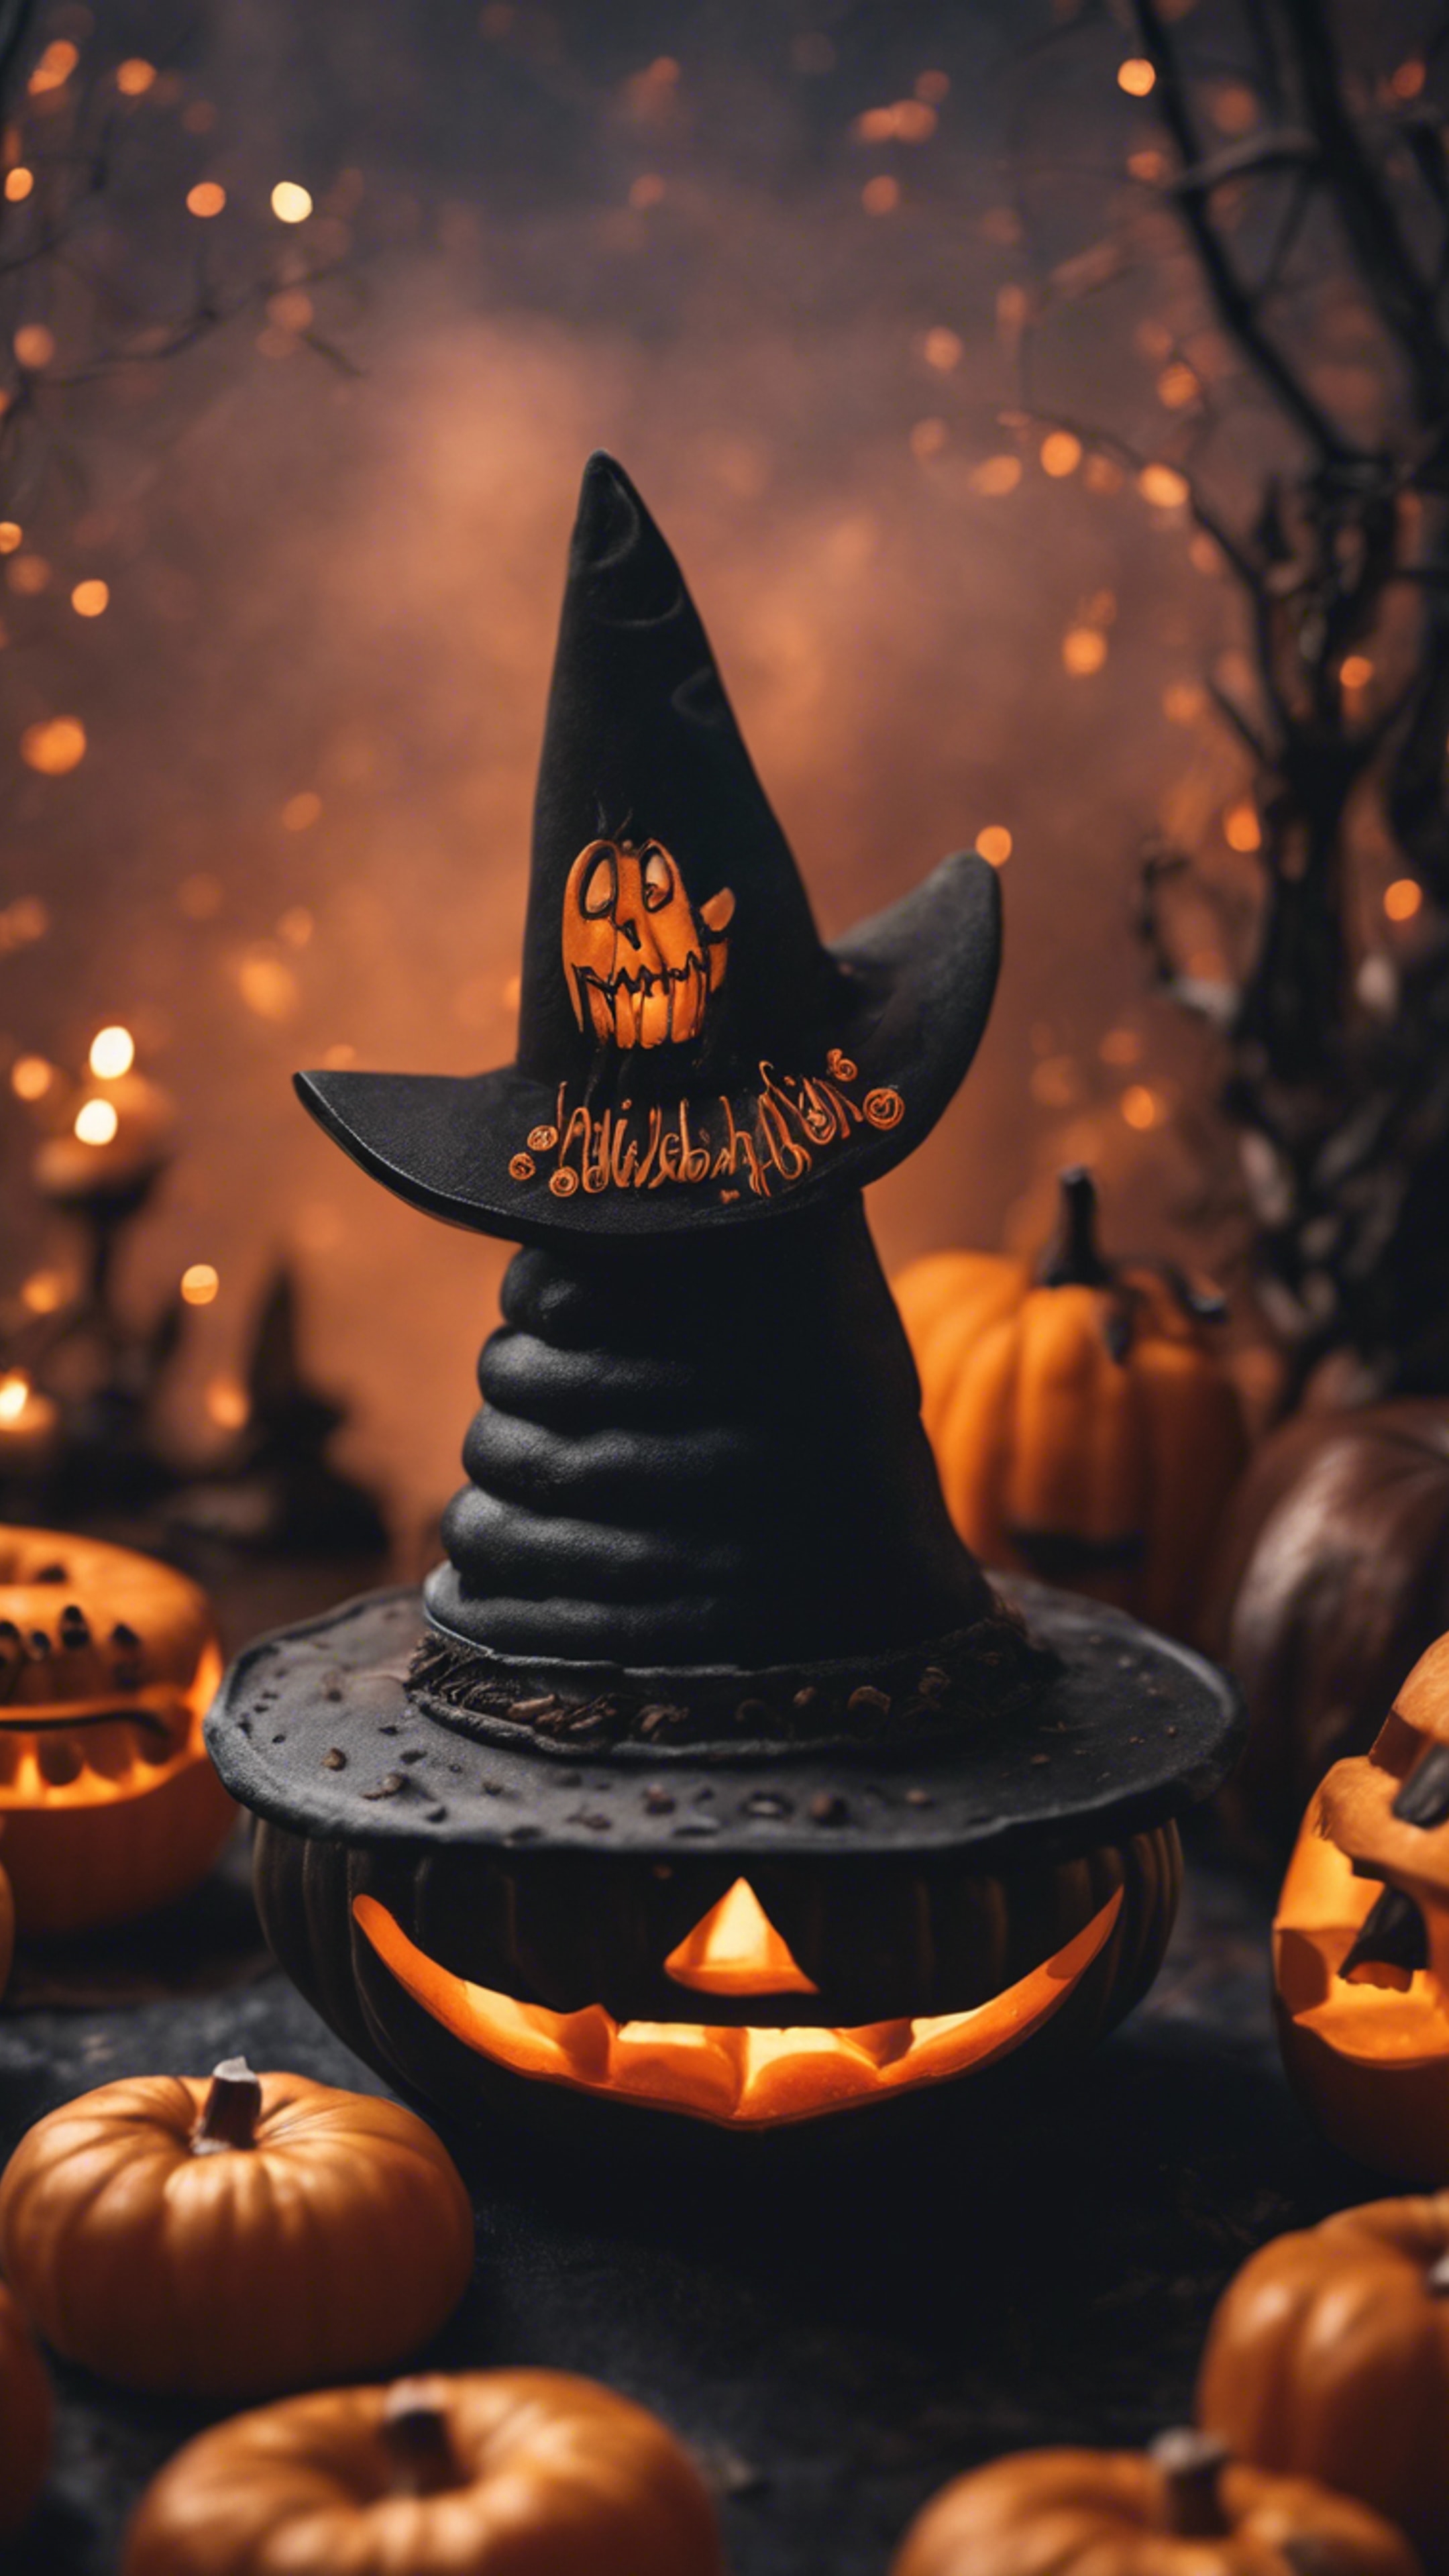 A spooky scene with jack-o-lanterns and a black witch's hat on a pumpkin-spiced donut.壁紙[393956df6a264774b0c0]